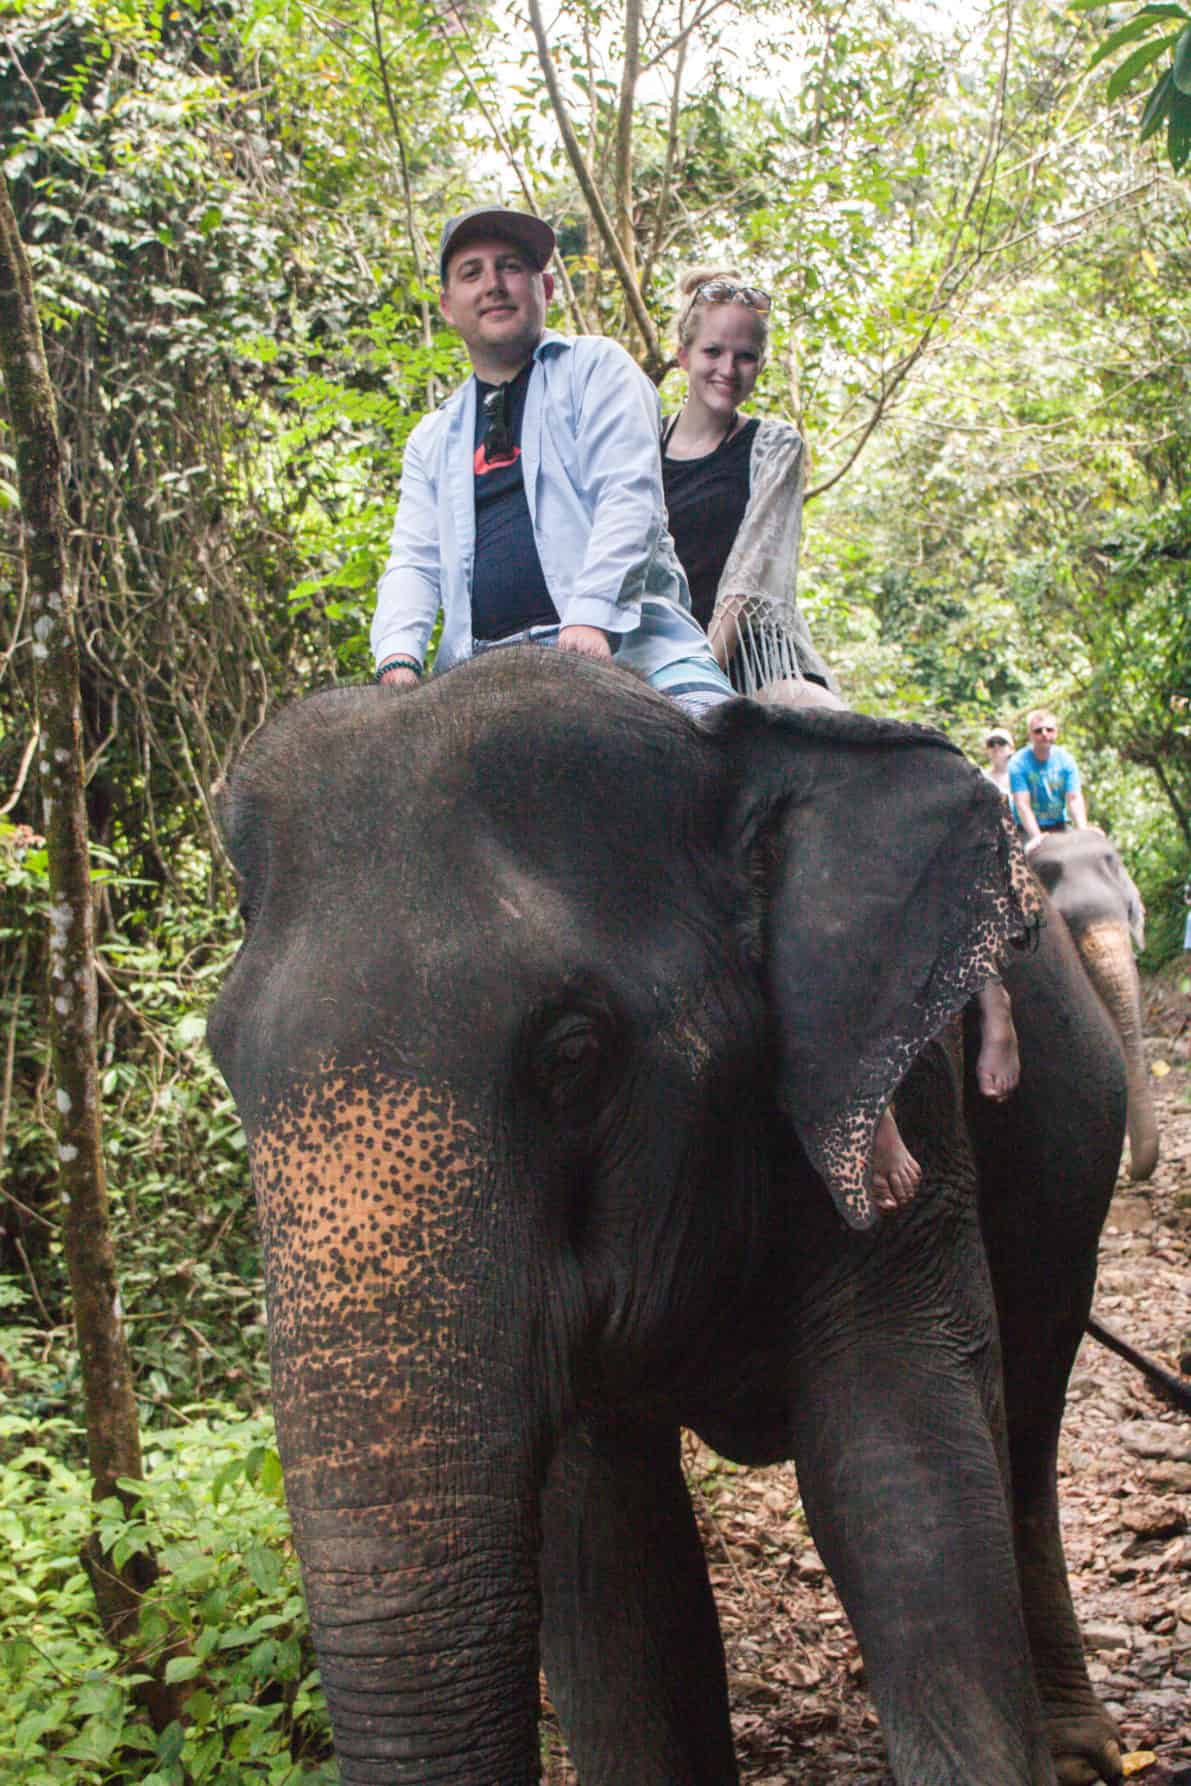 Don't support unethical animal tourism. Instead meet elephants up close and personal, and back ethical elephant tourism at the Phang Nga Elephant Park.